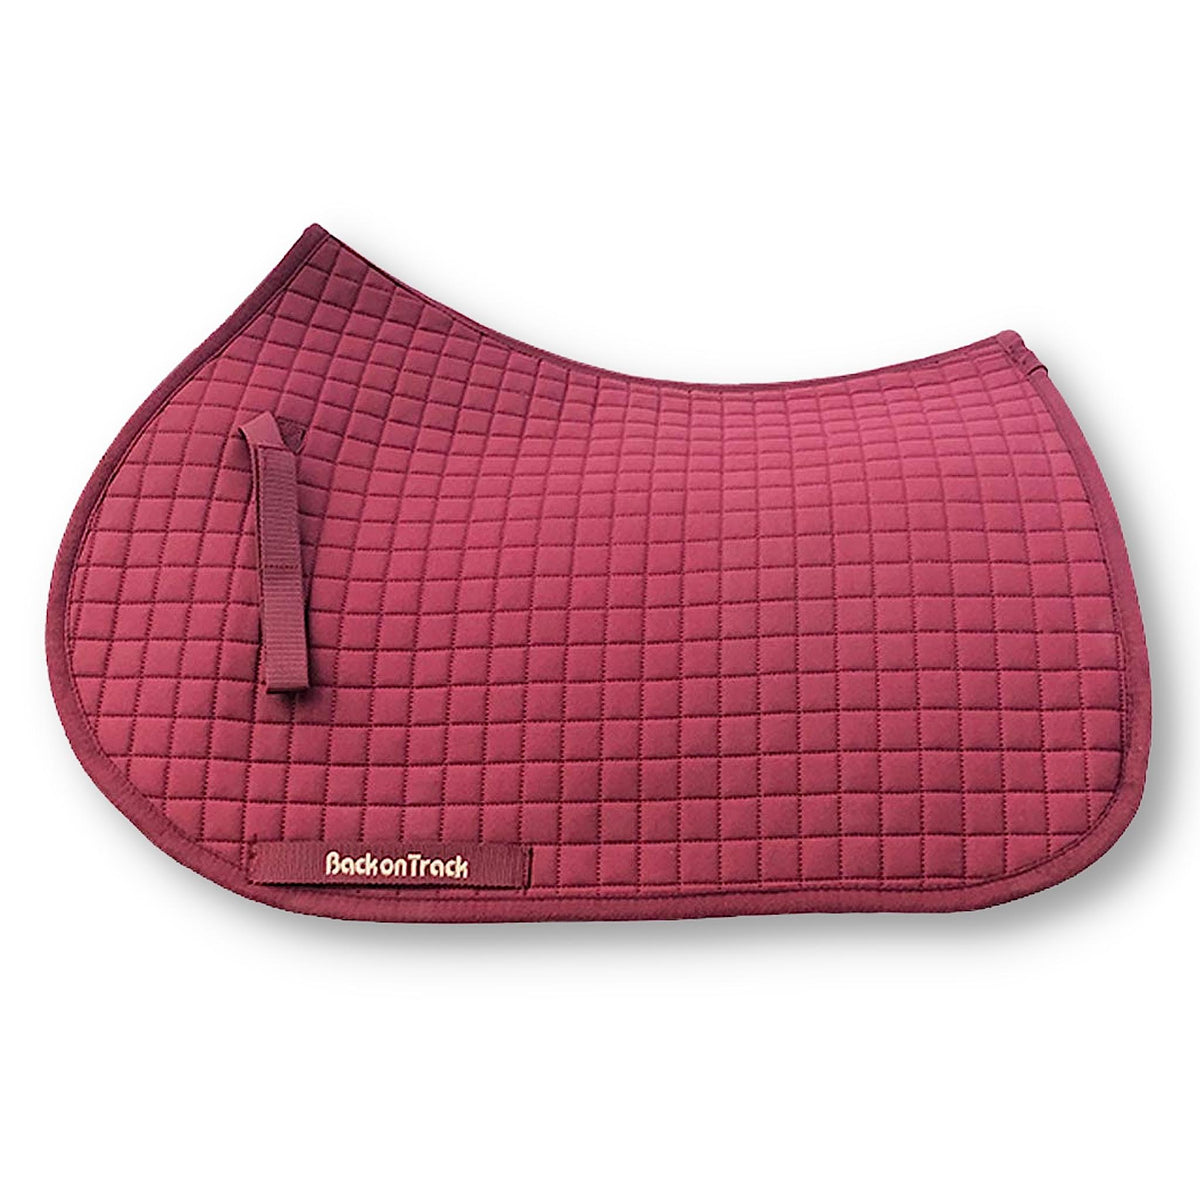 Burgundy saddle pad with keepers in all purpose shape.